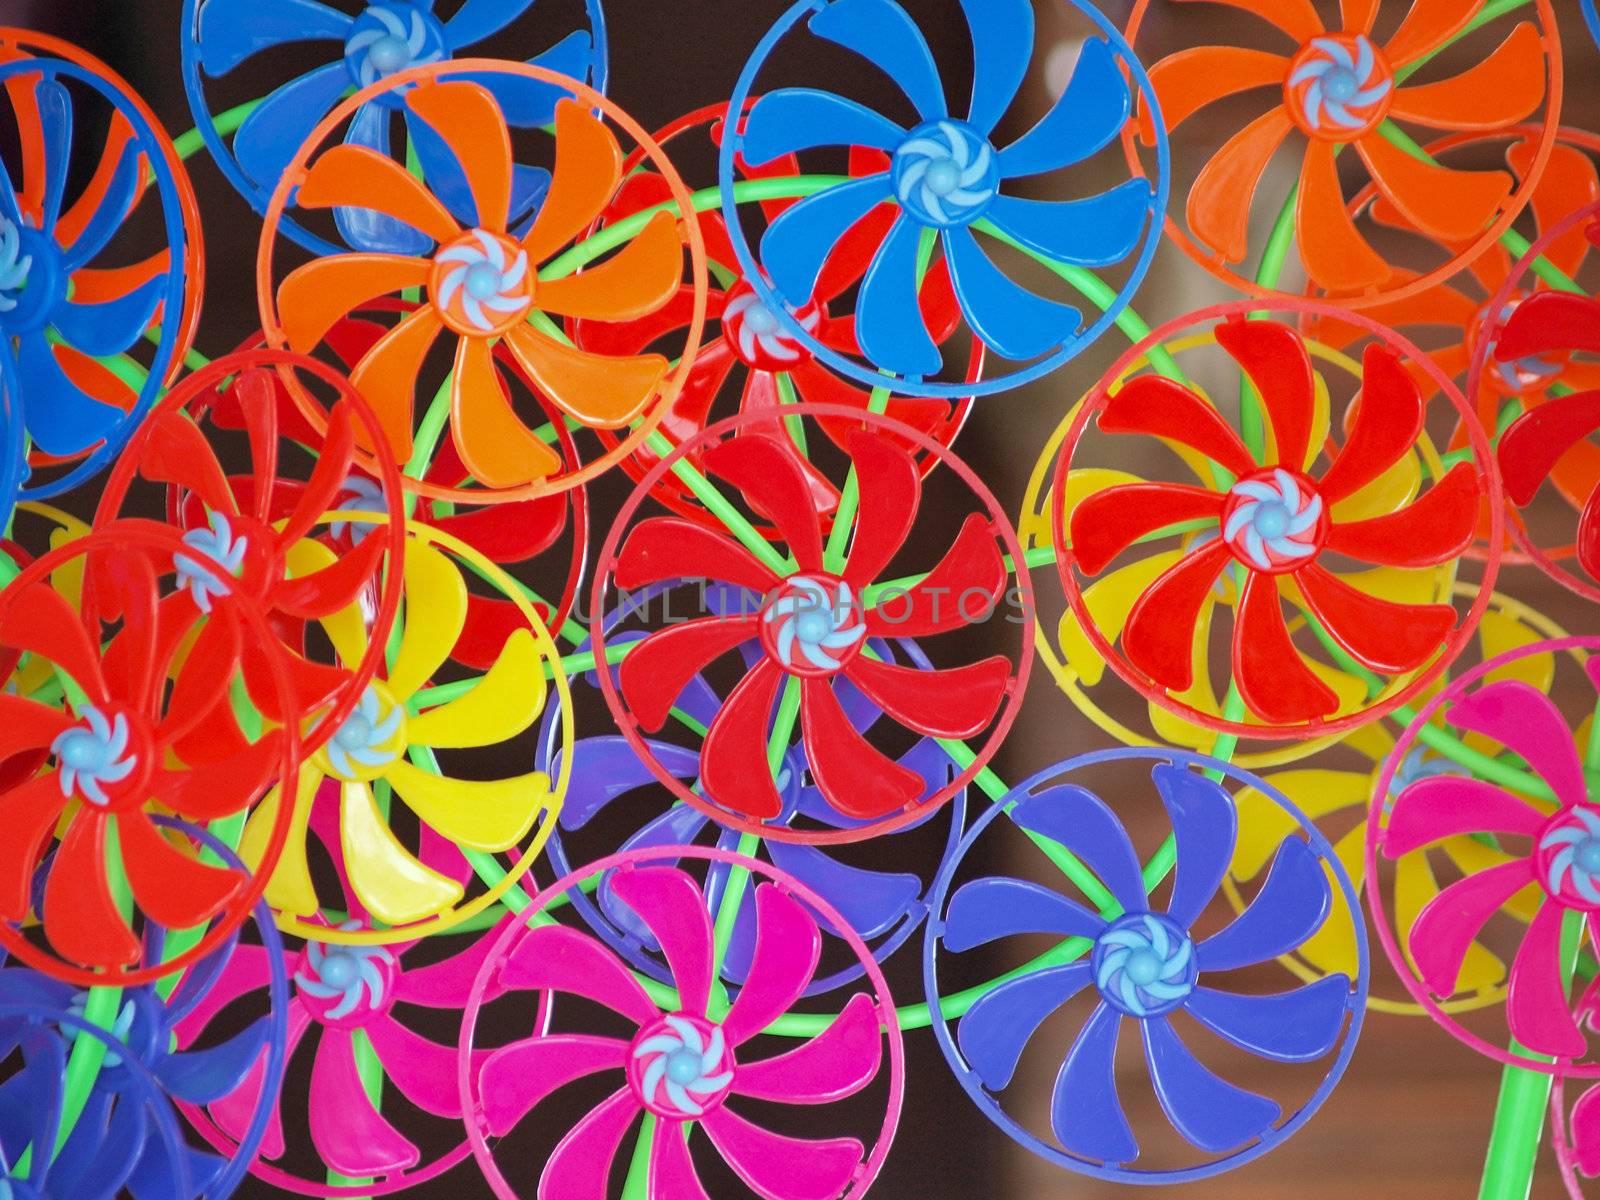 Wind spinned spinner toy by jakgree